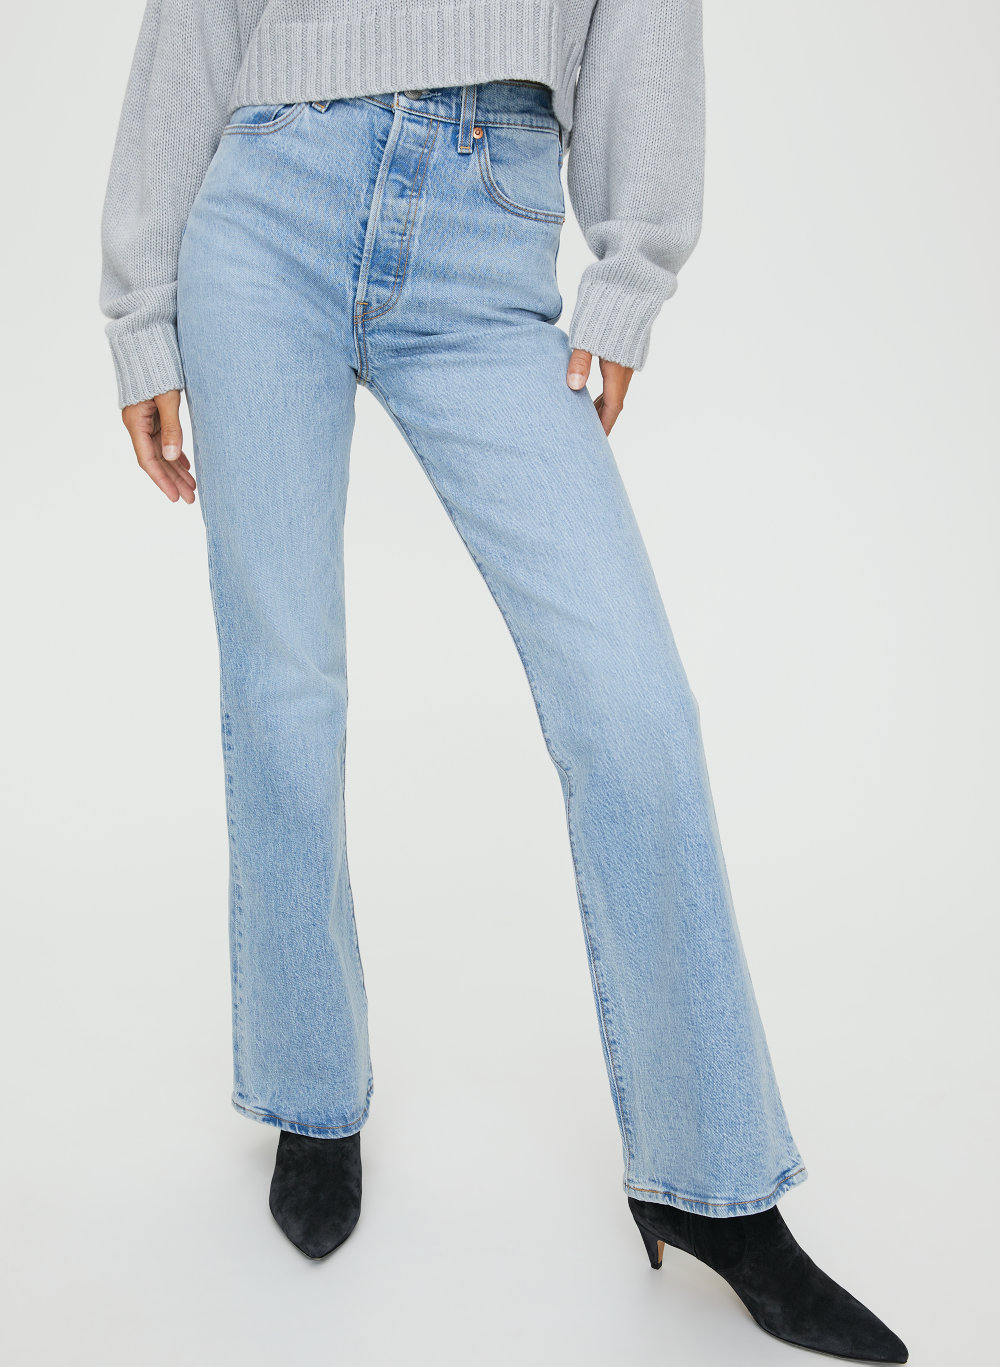 levi's flare jeans